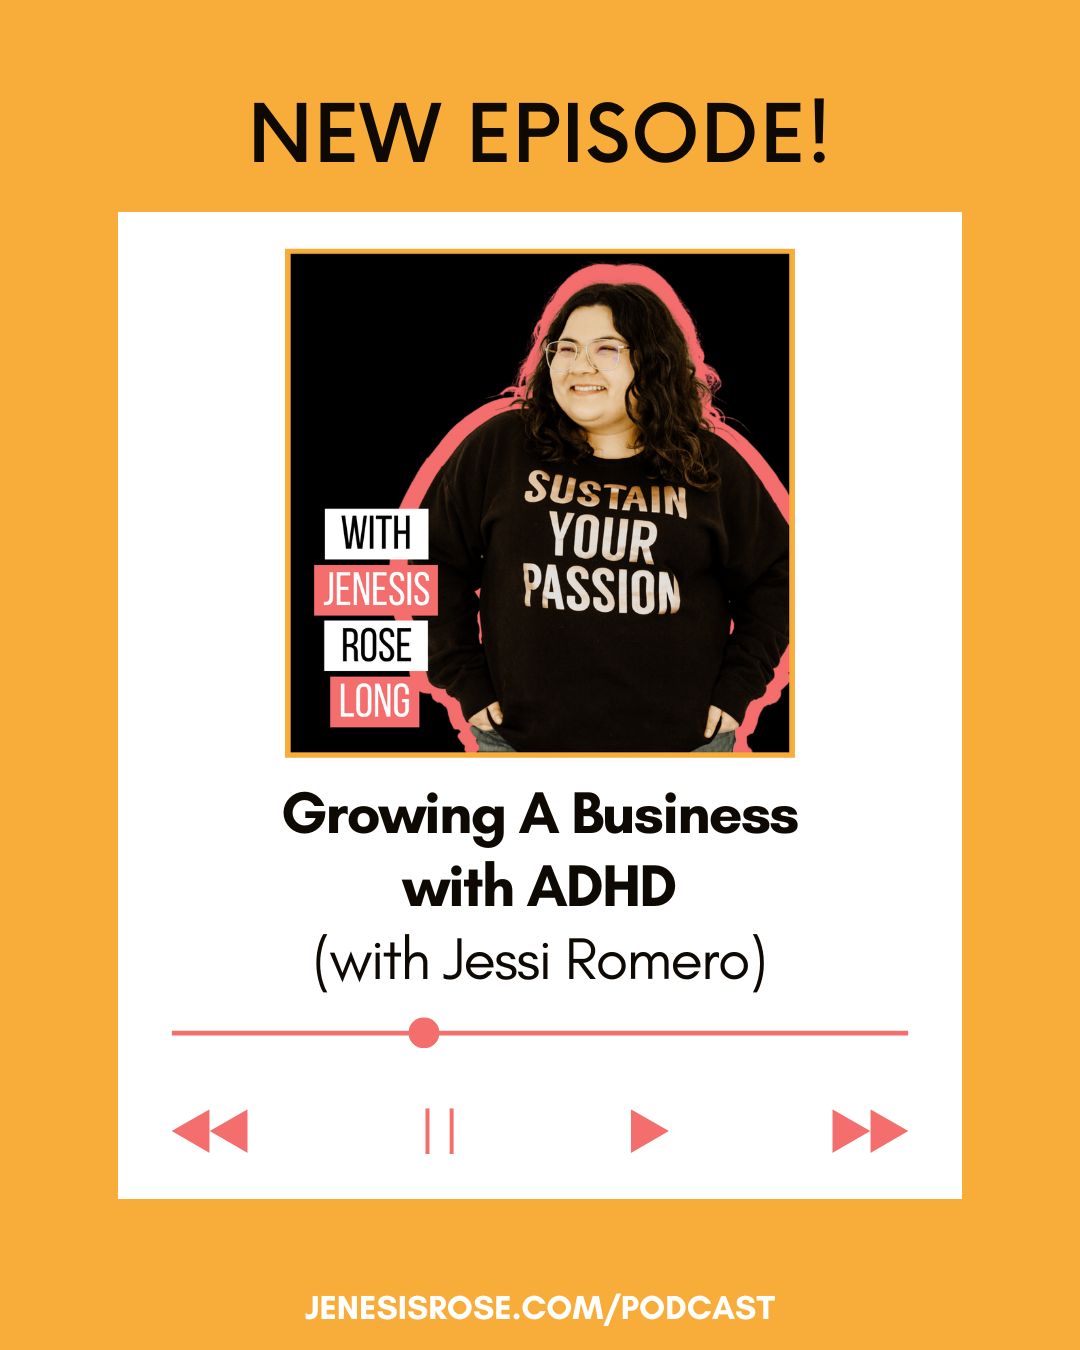 Growing A Business with ADHD (with Jessi Romero)